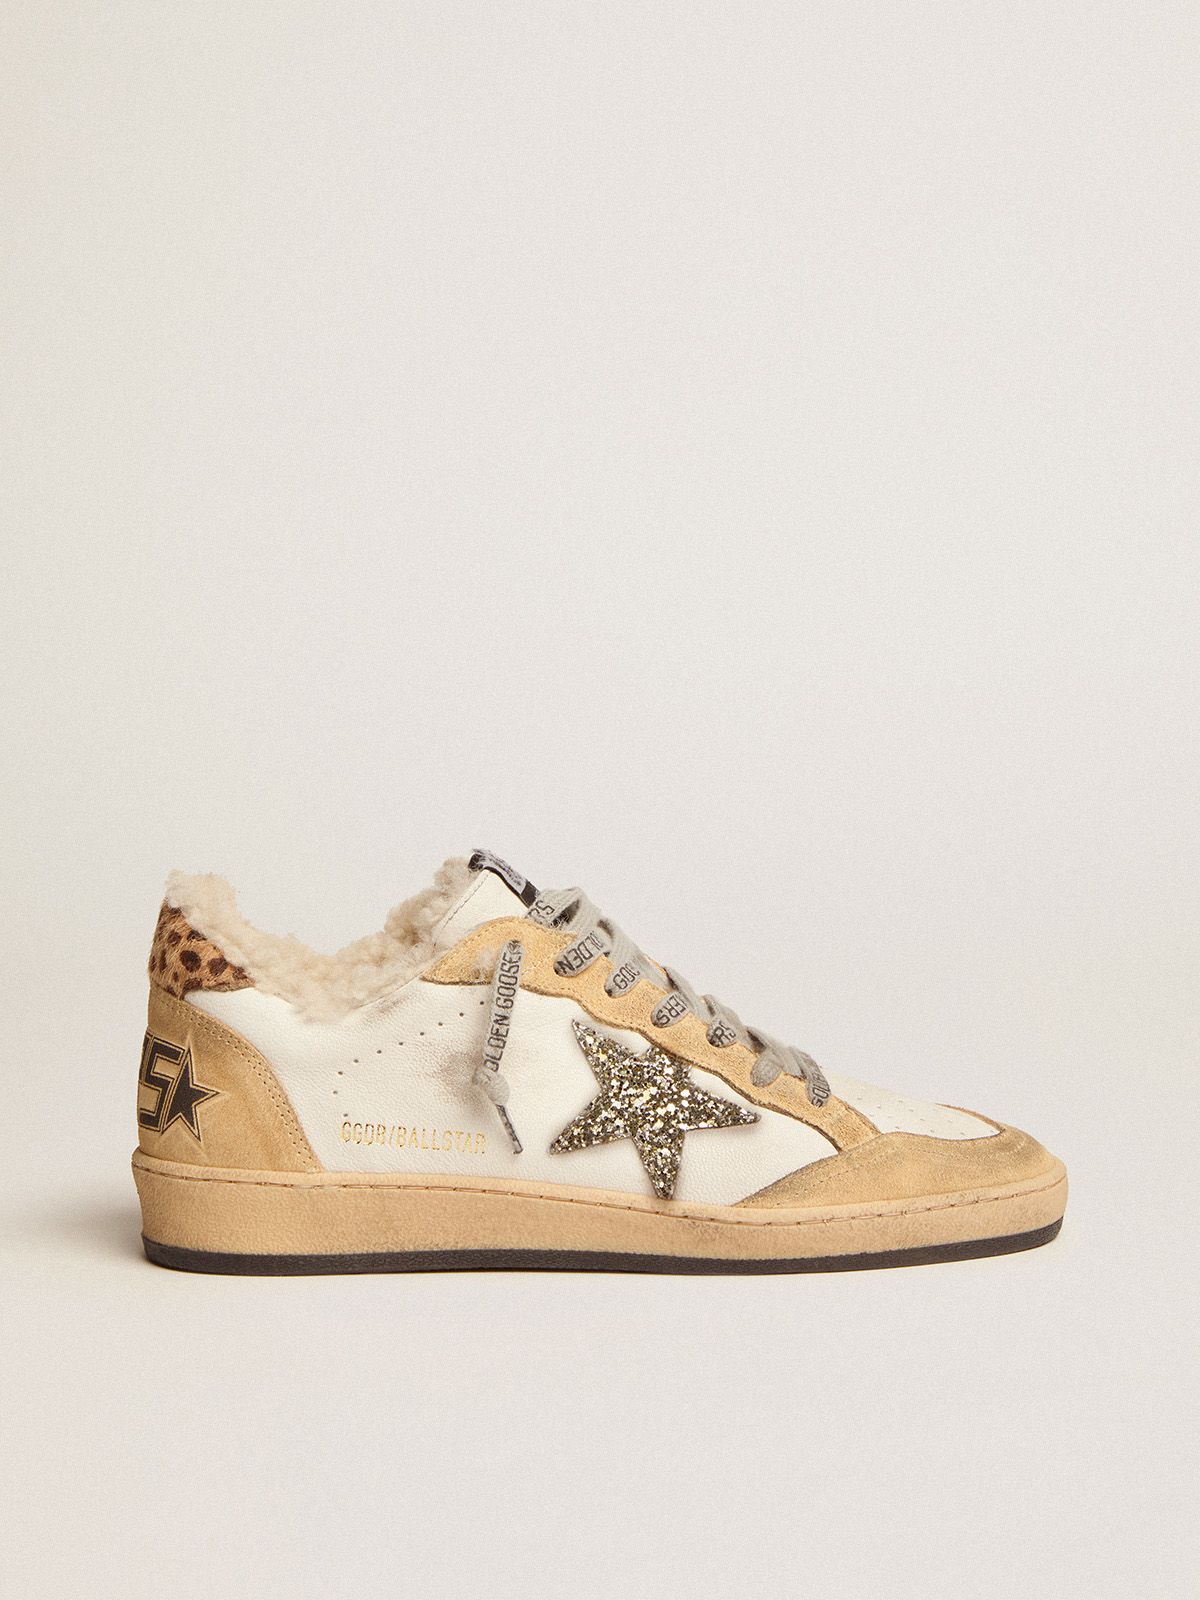 Ball Star sneakers in white nappa leather with platinum-colored glitter star and shearling lining | 